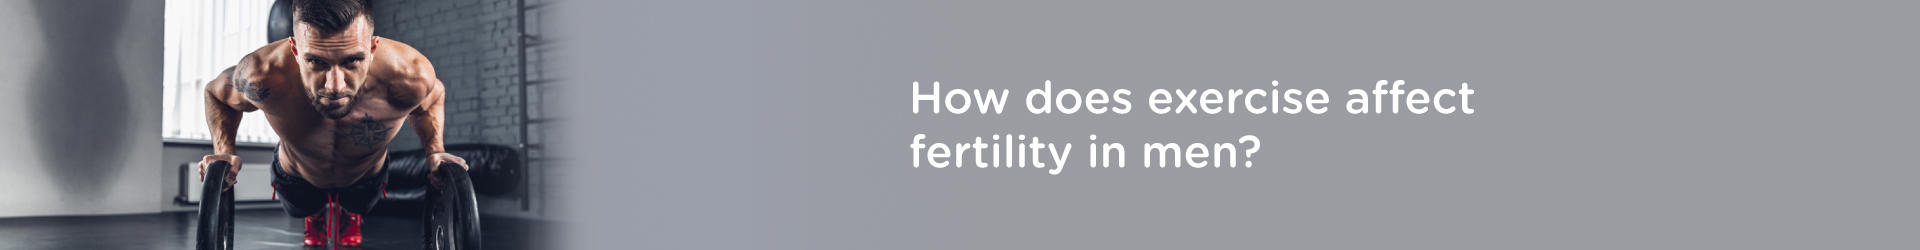 How Does Exercise Affect Fertility in Men?